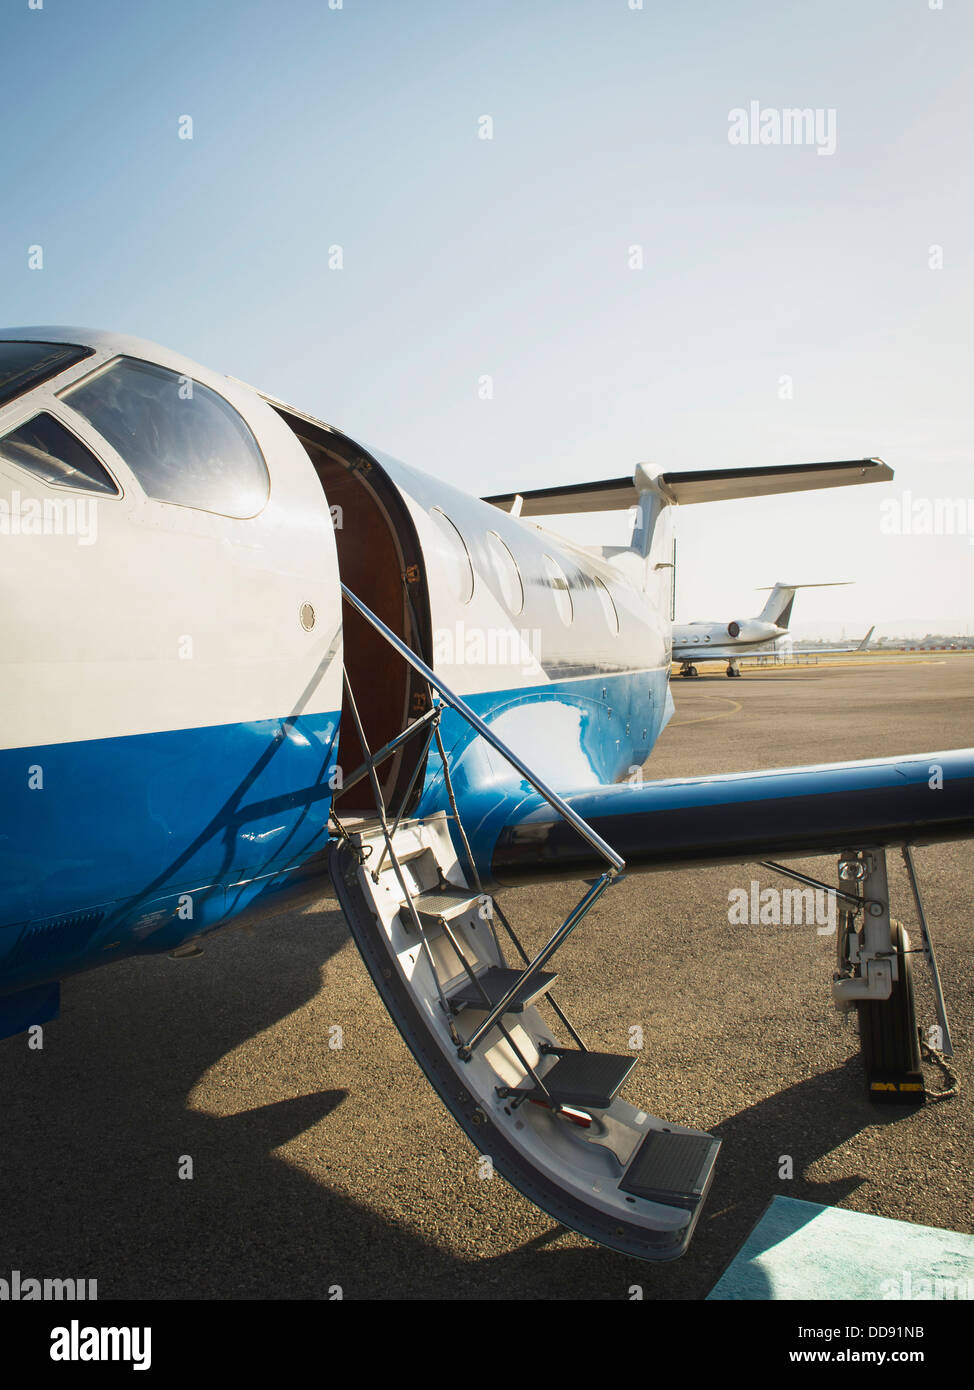 Airplane grounded on runway Stock Photo